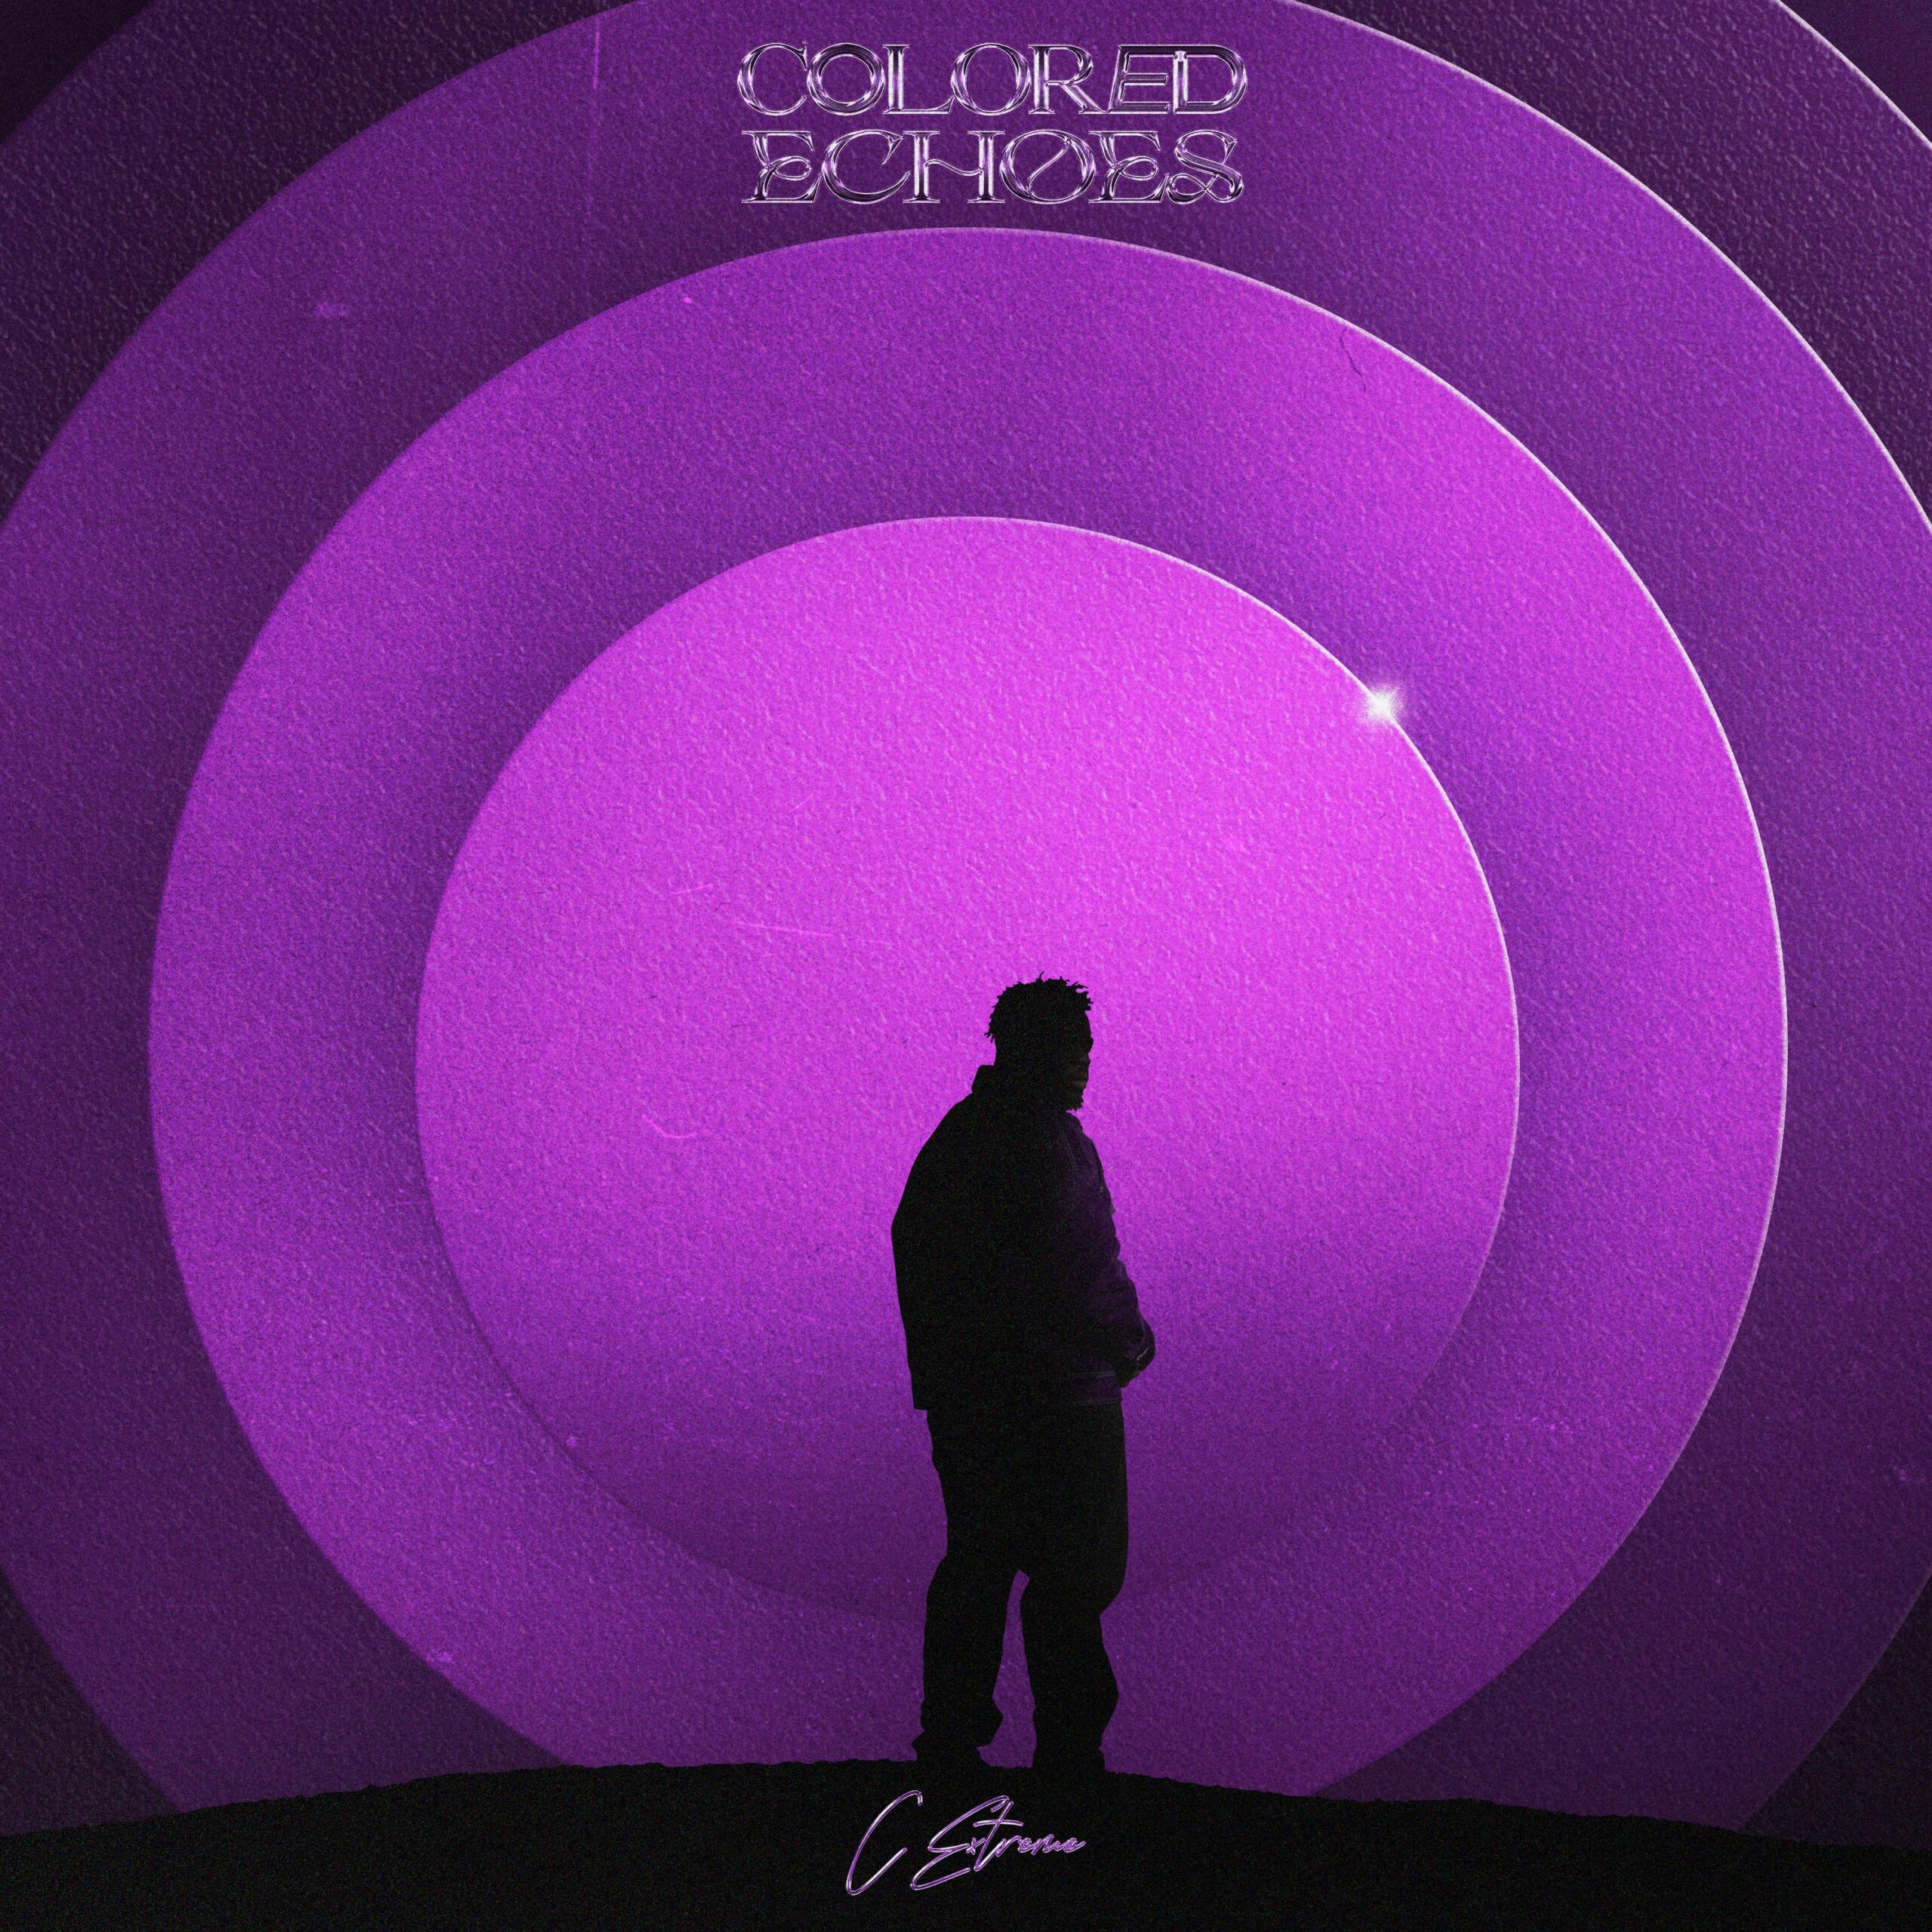 C Extreme – “Colored Echoes”